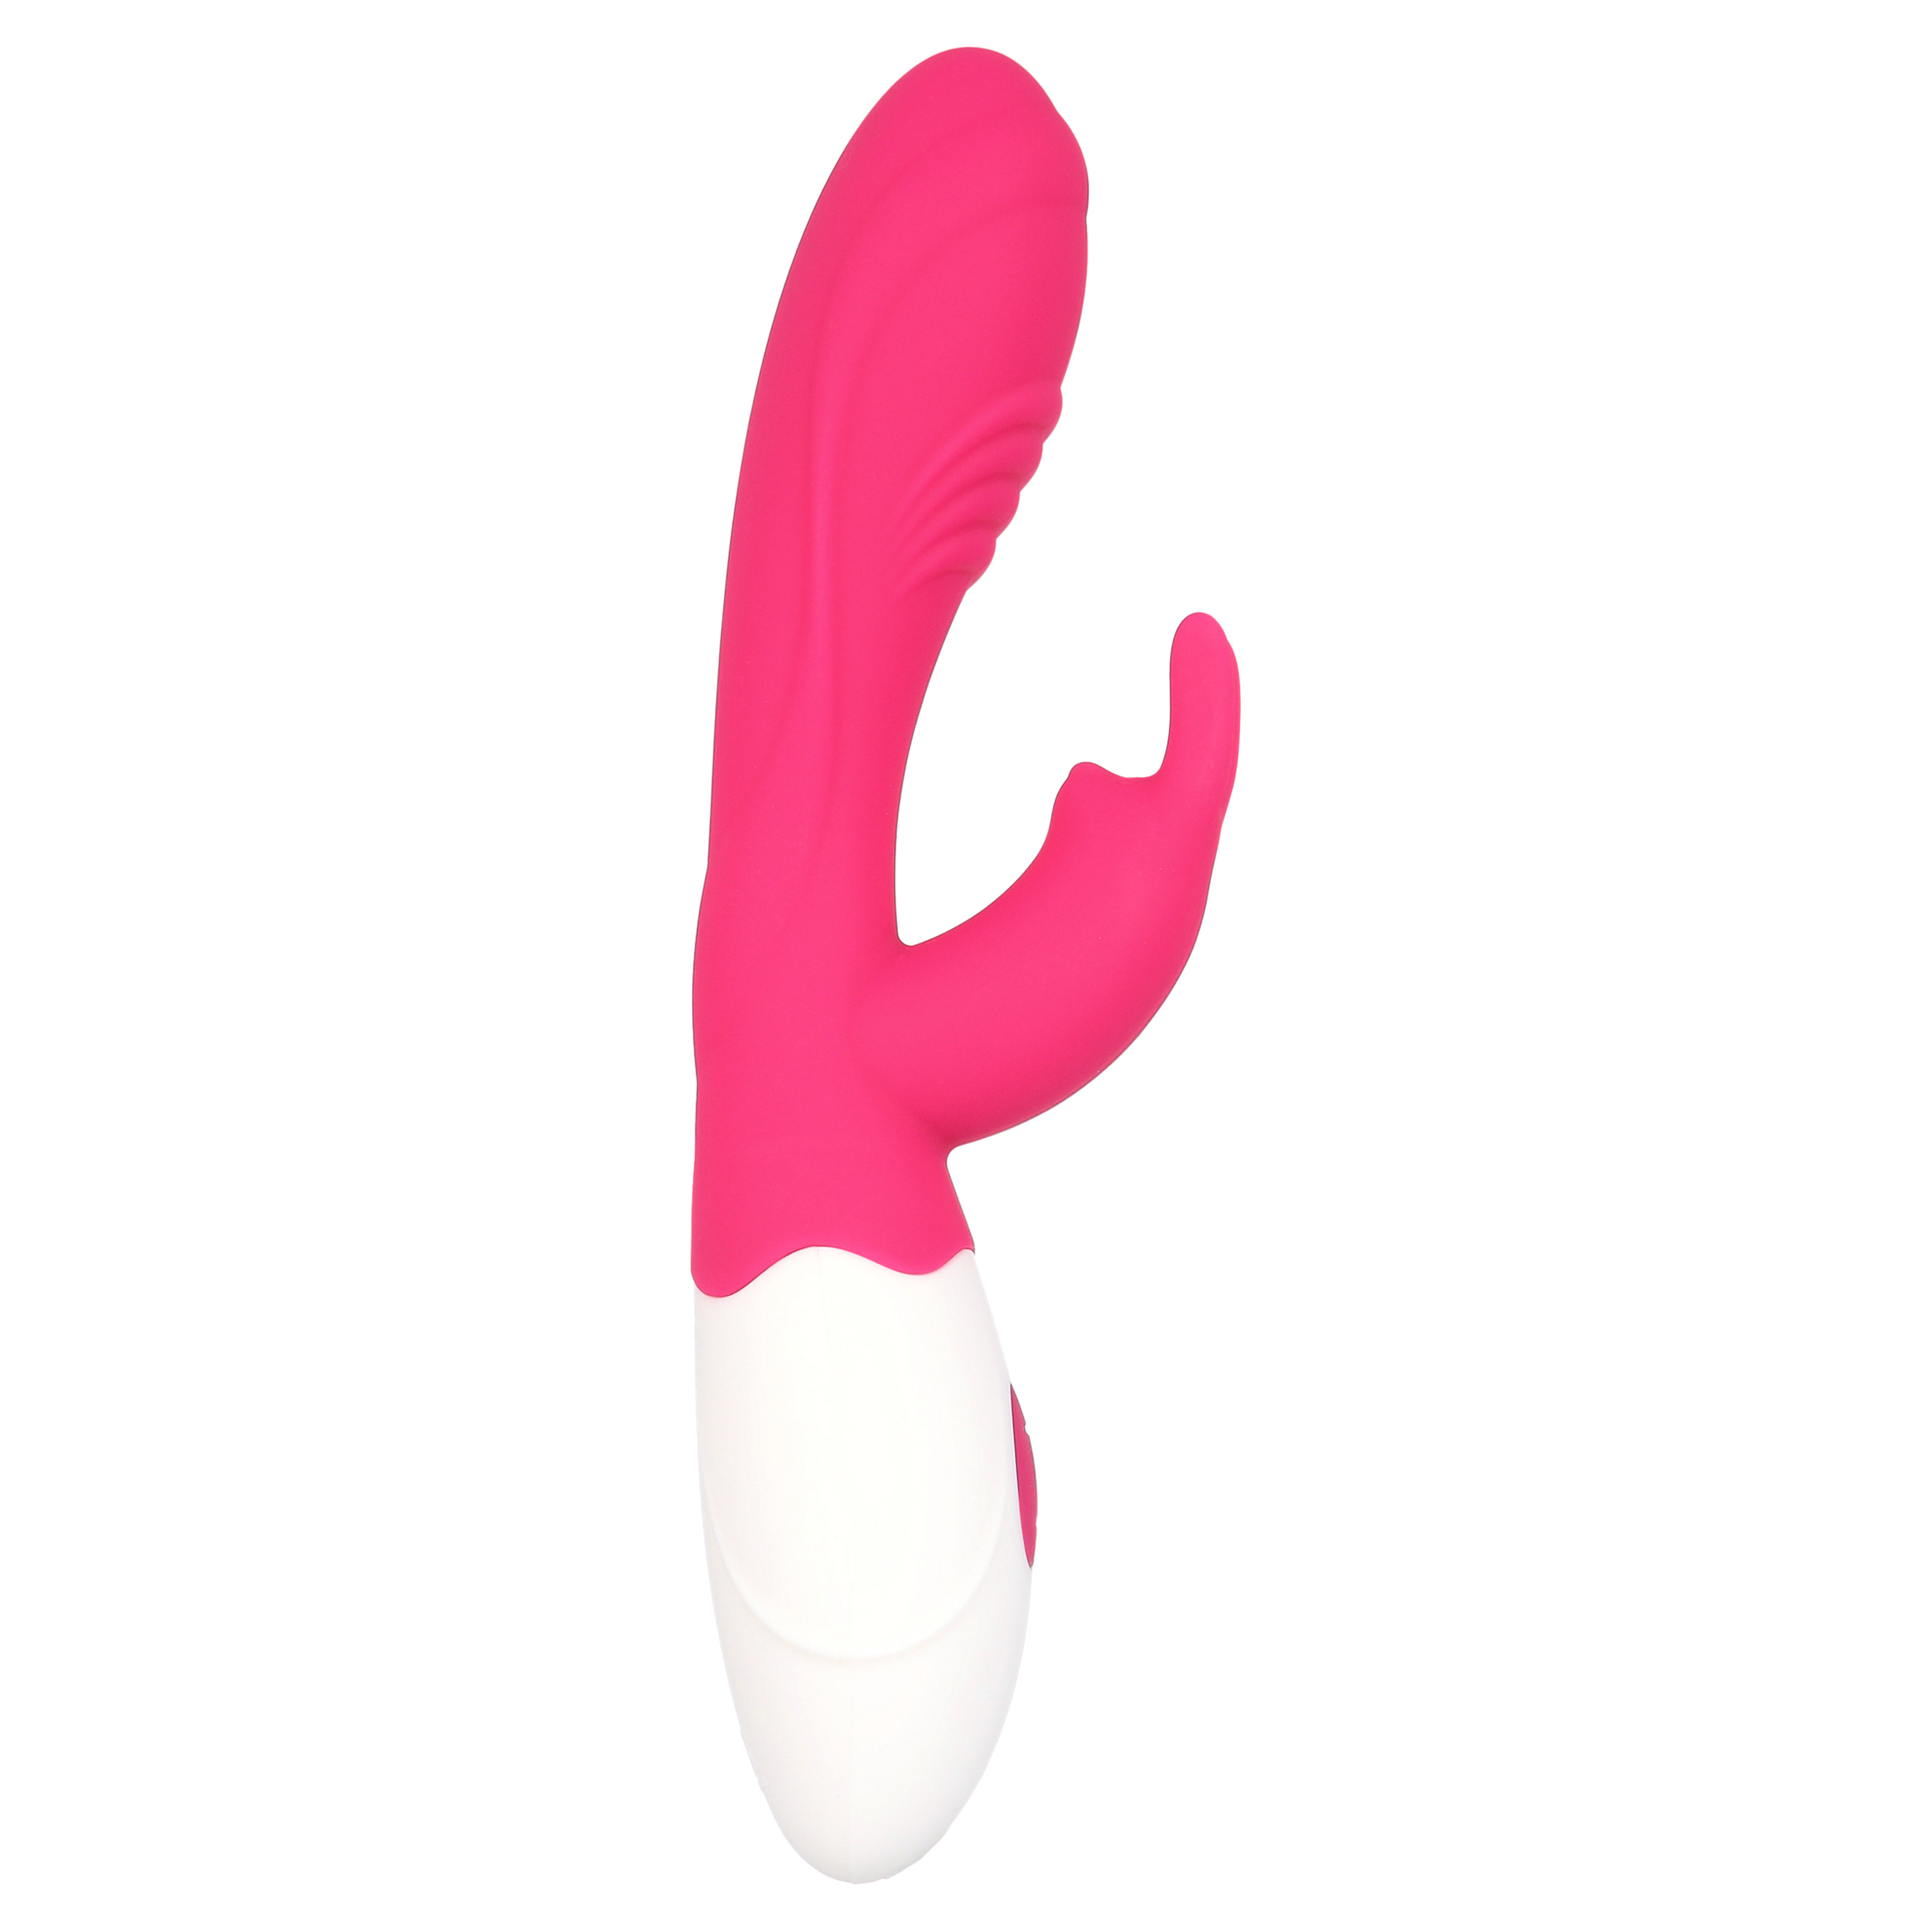 Rabbit Lily Vibrator Dual Pleasure G-Spot and Clitoral Waterproof Stimulator by Better Love - image 2 of 5